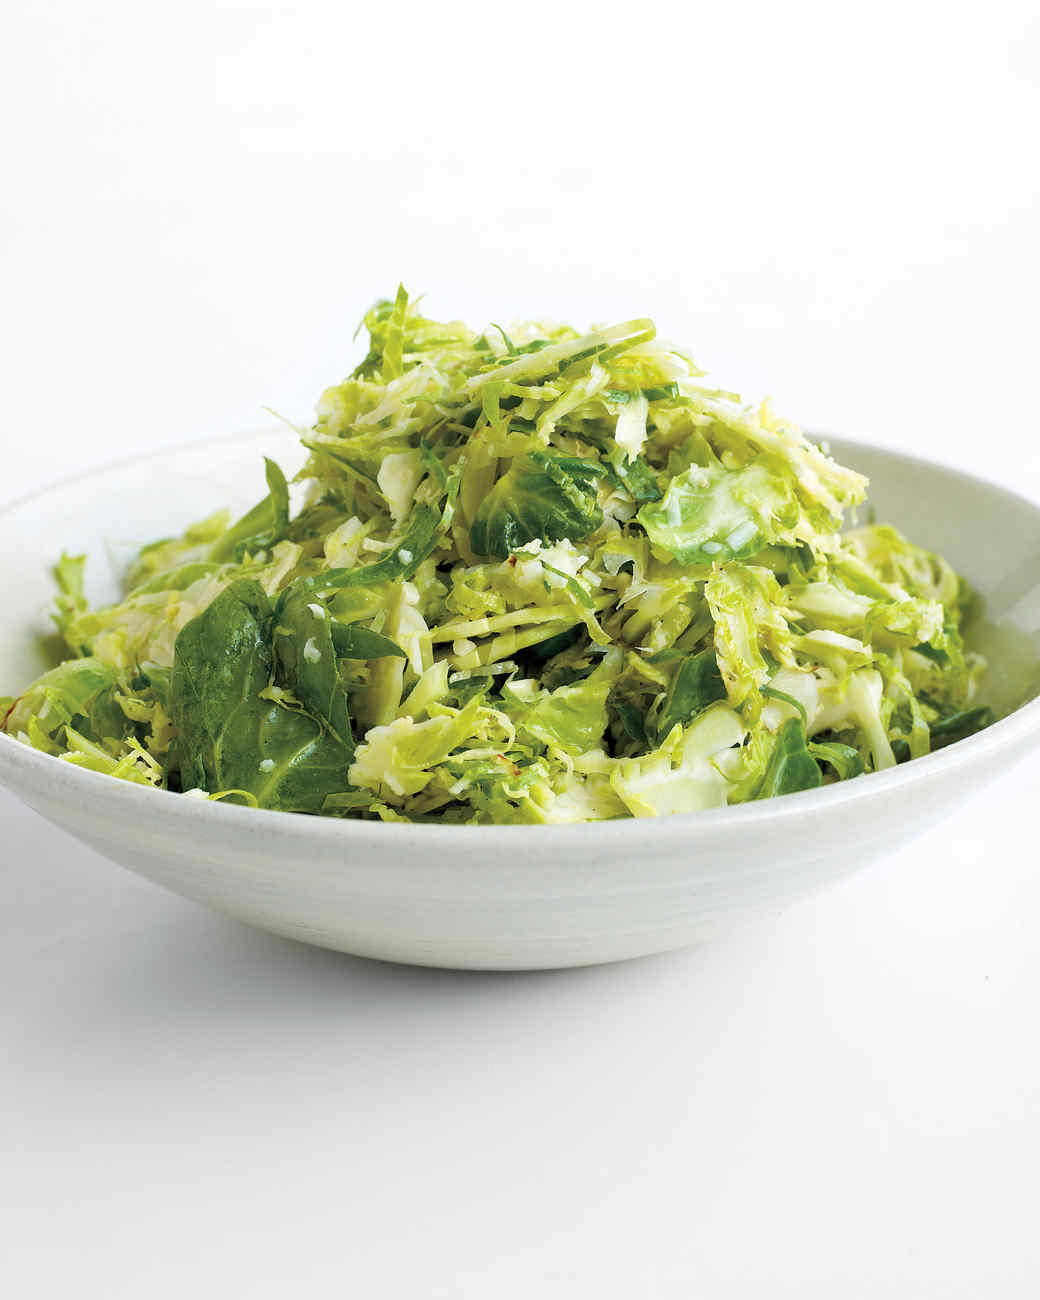 warm brussel sprout salad